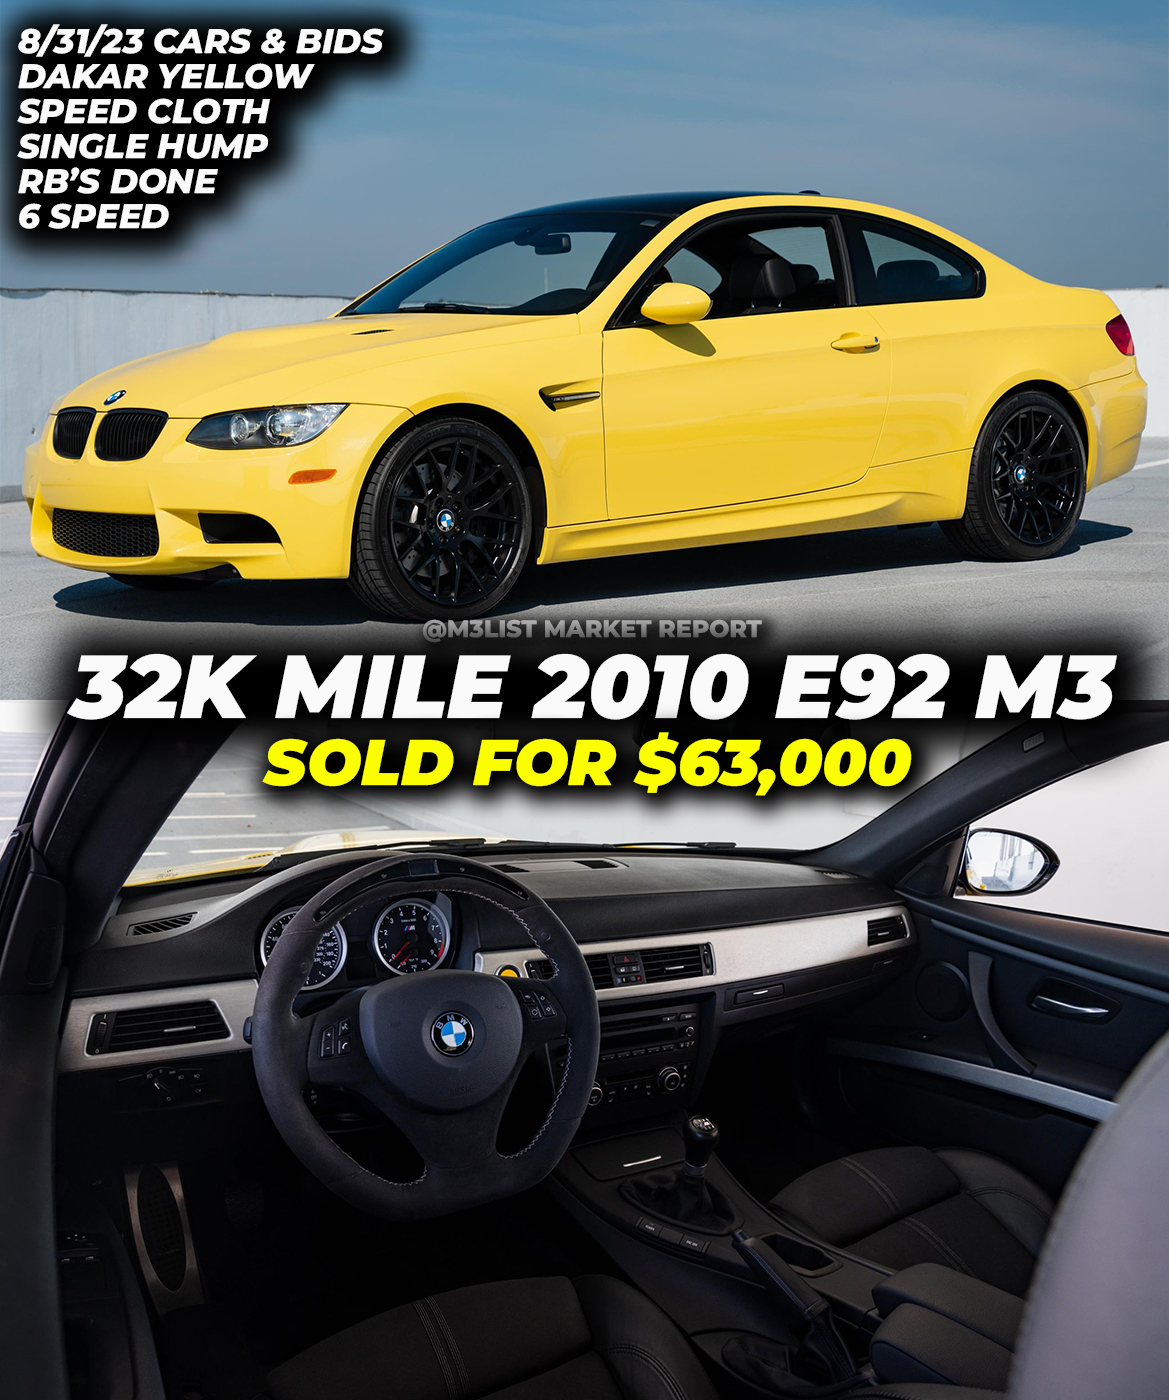 2010 BMW E92 M3 in Dakar Yellow sells for $63,000 with only 32k miles